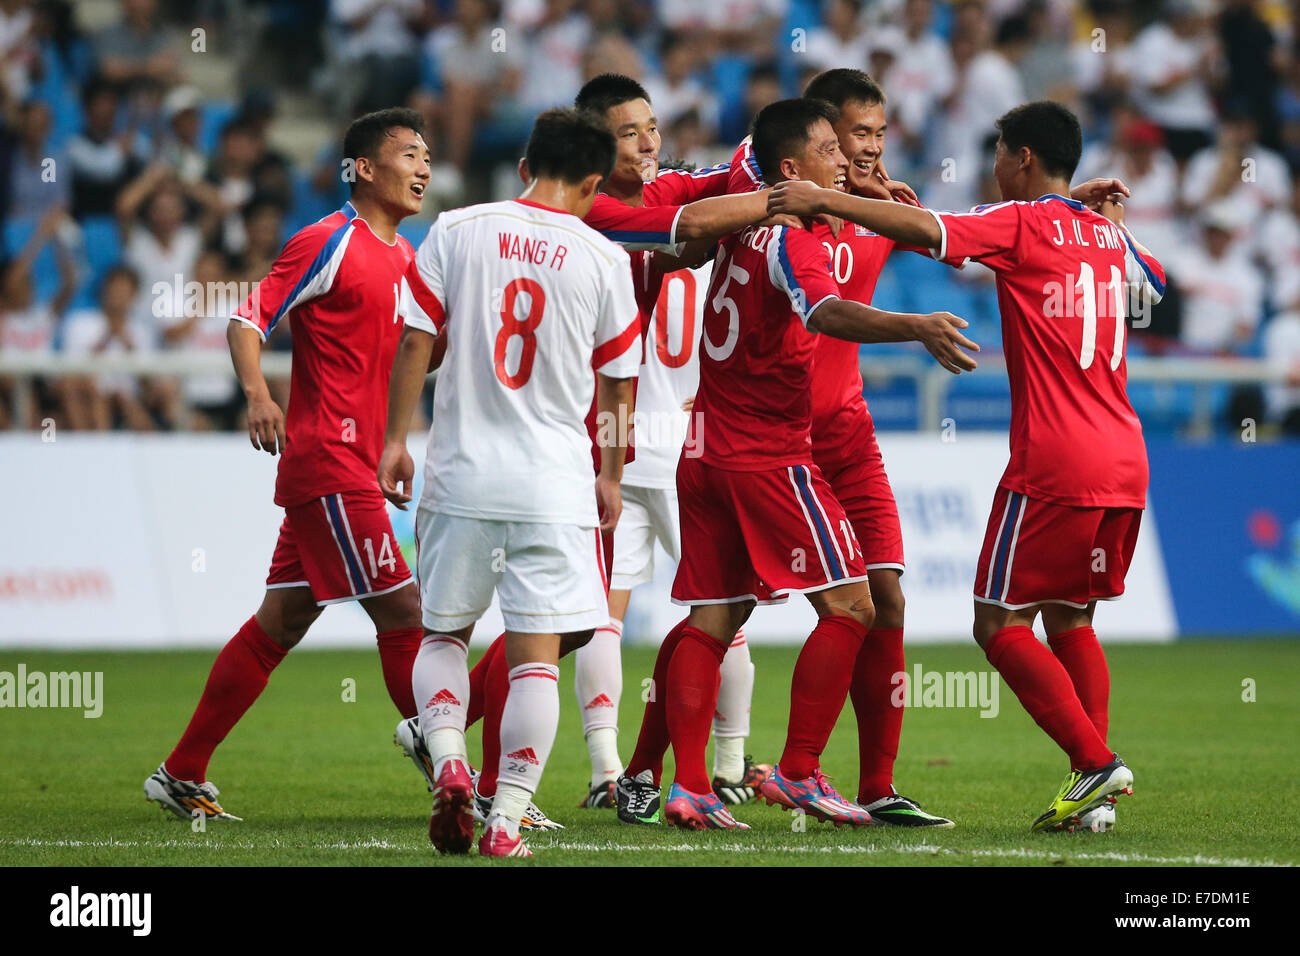 Incheon, South Korea. 15th Sep, 2014. Players of the Democratic People's Republic of Korea (DPRK) celebrate for a goal during the men's football first round group F match against China at the 17th Asian Games in Incheon, South Korea, on Sept. 15, 2014. DPRK won 3-0. © Zhang Fan/Xinhua/Alamy Live News Stock Photo